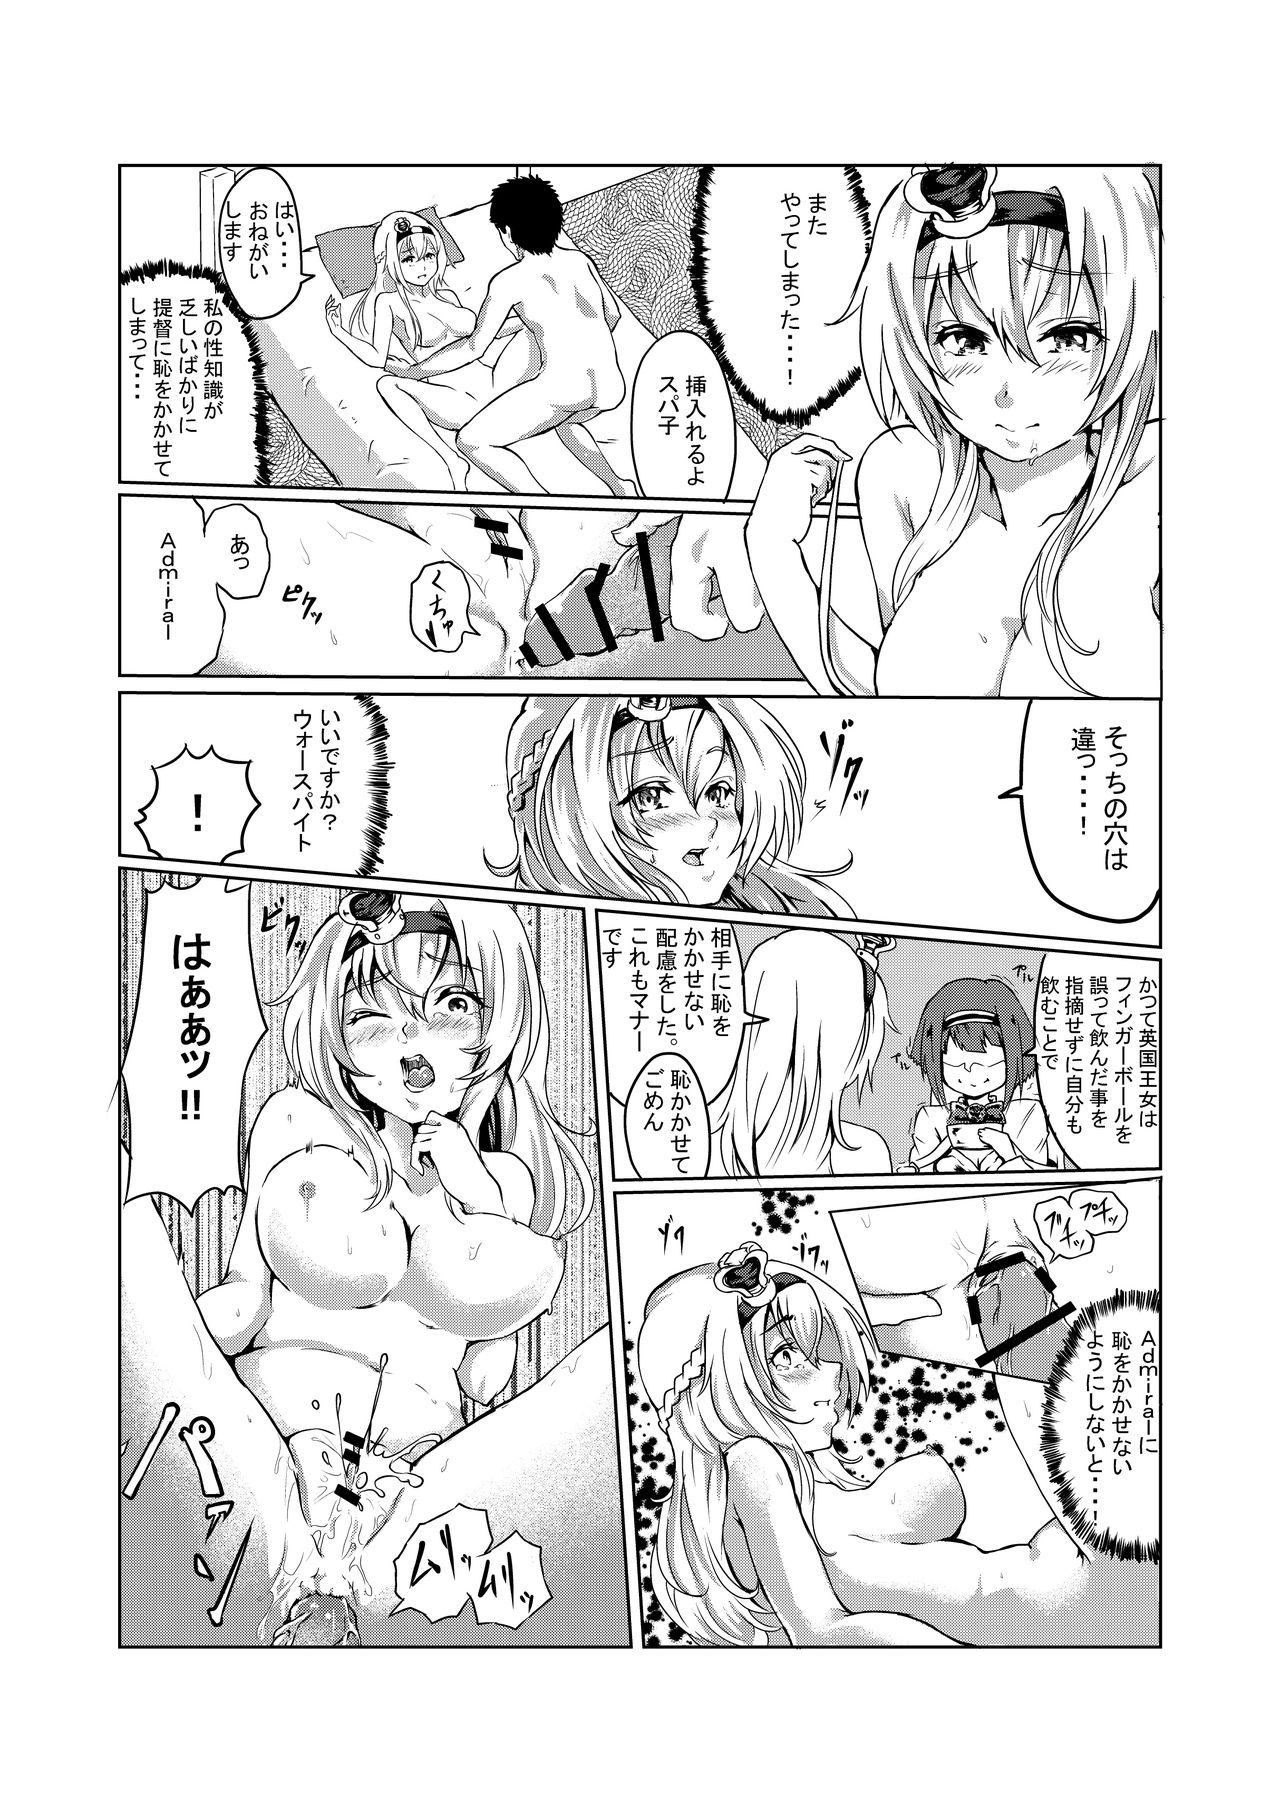 Jerking Off 女王陛下の手淫蜜壺 - Kantai collection Toy - Page 4